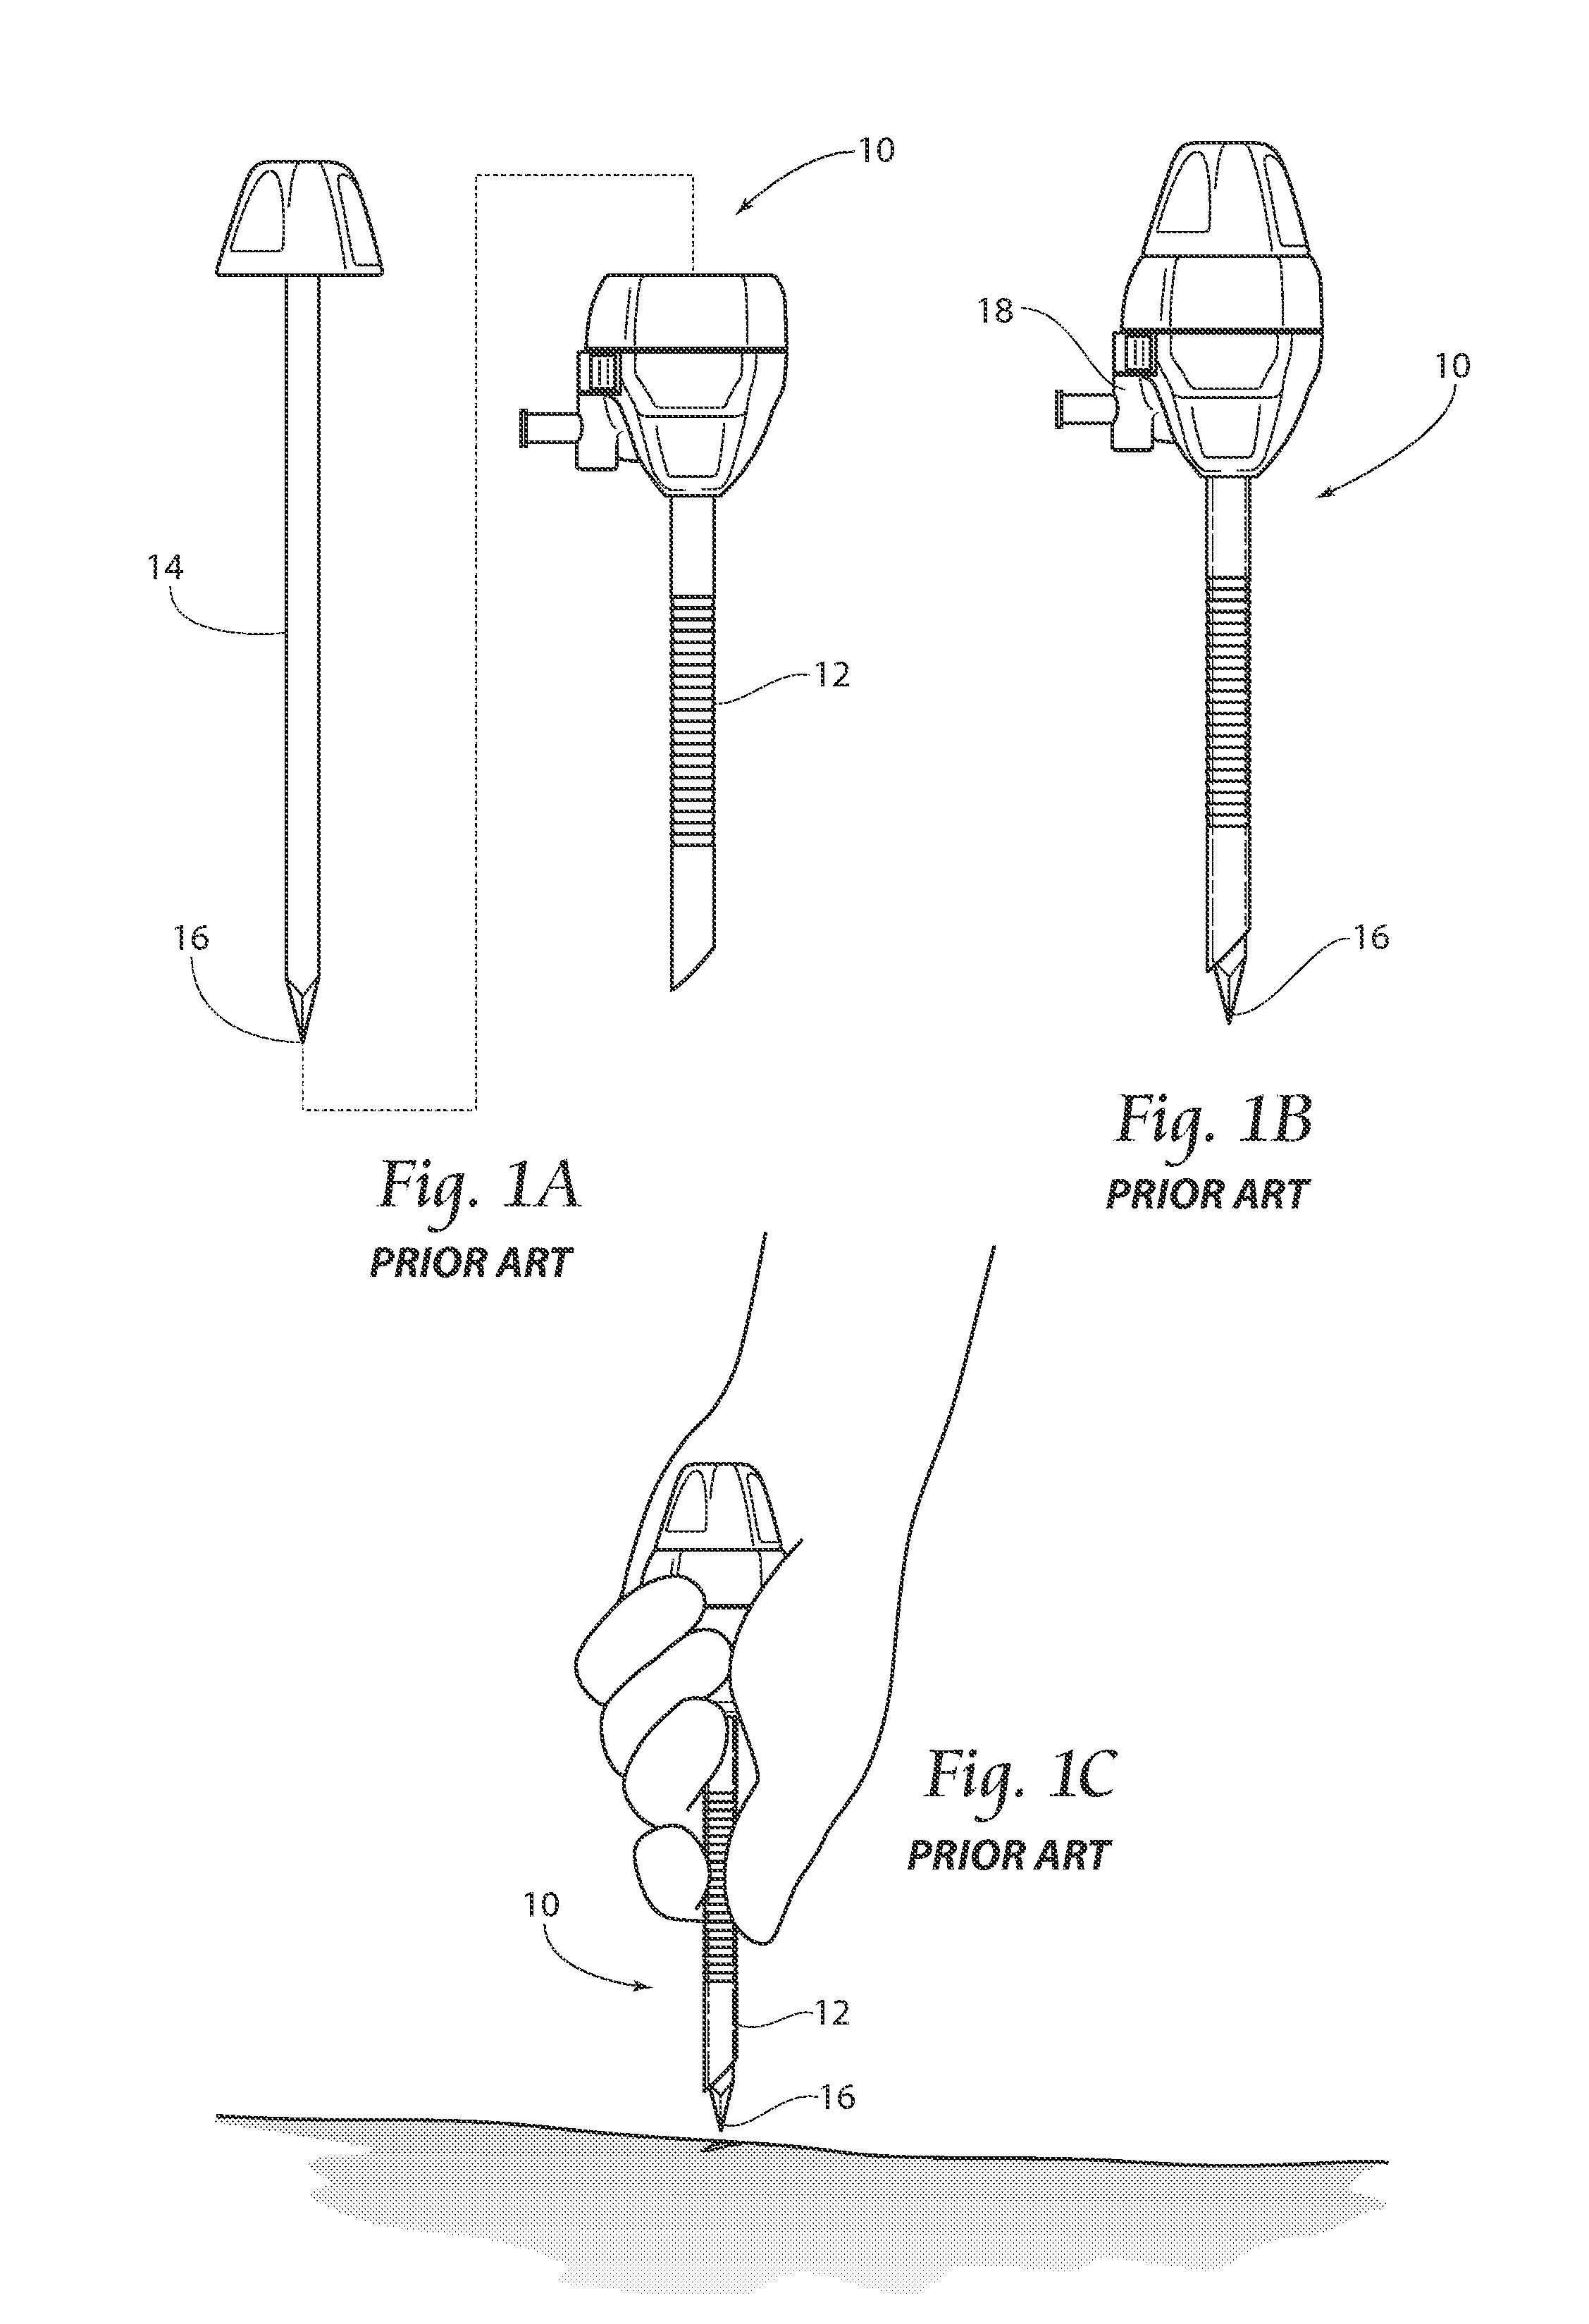 Devices, systems, and methods for performing endoscopic surgical procedures